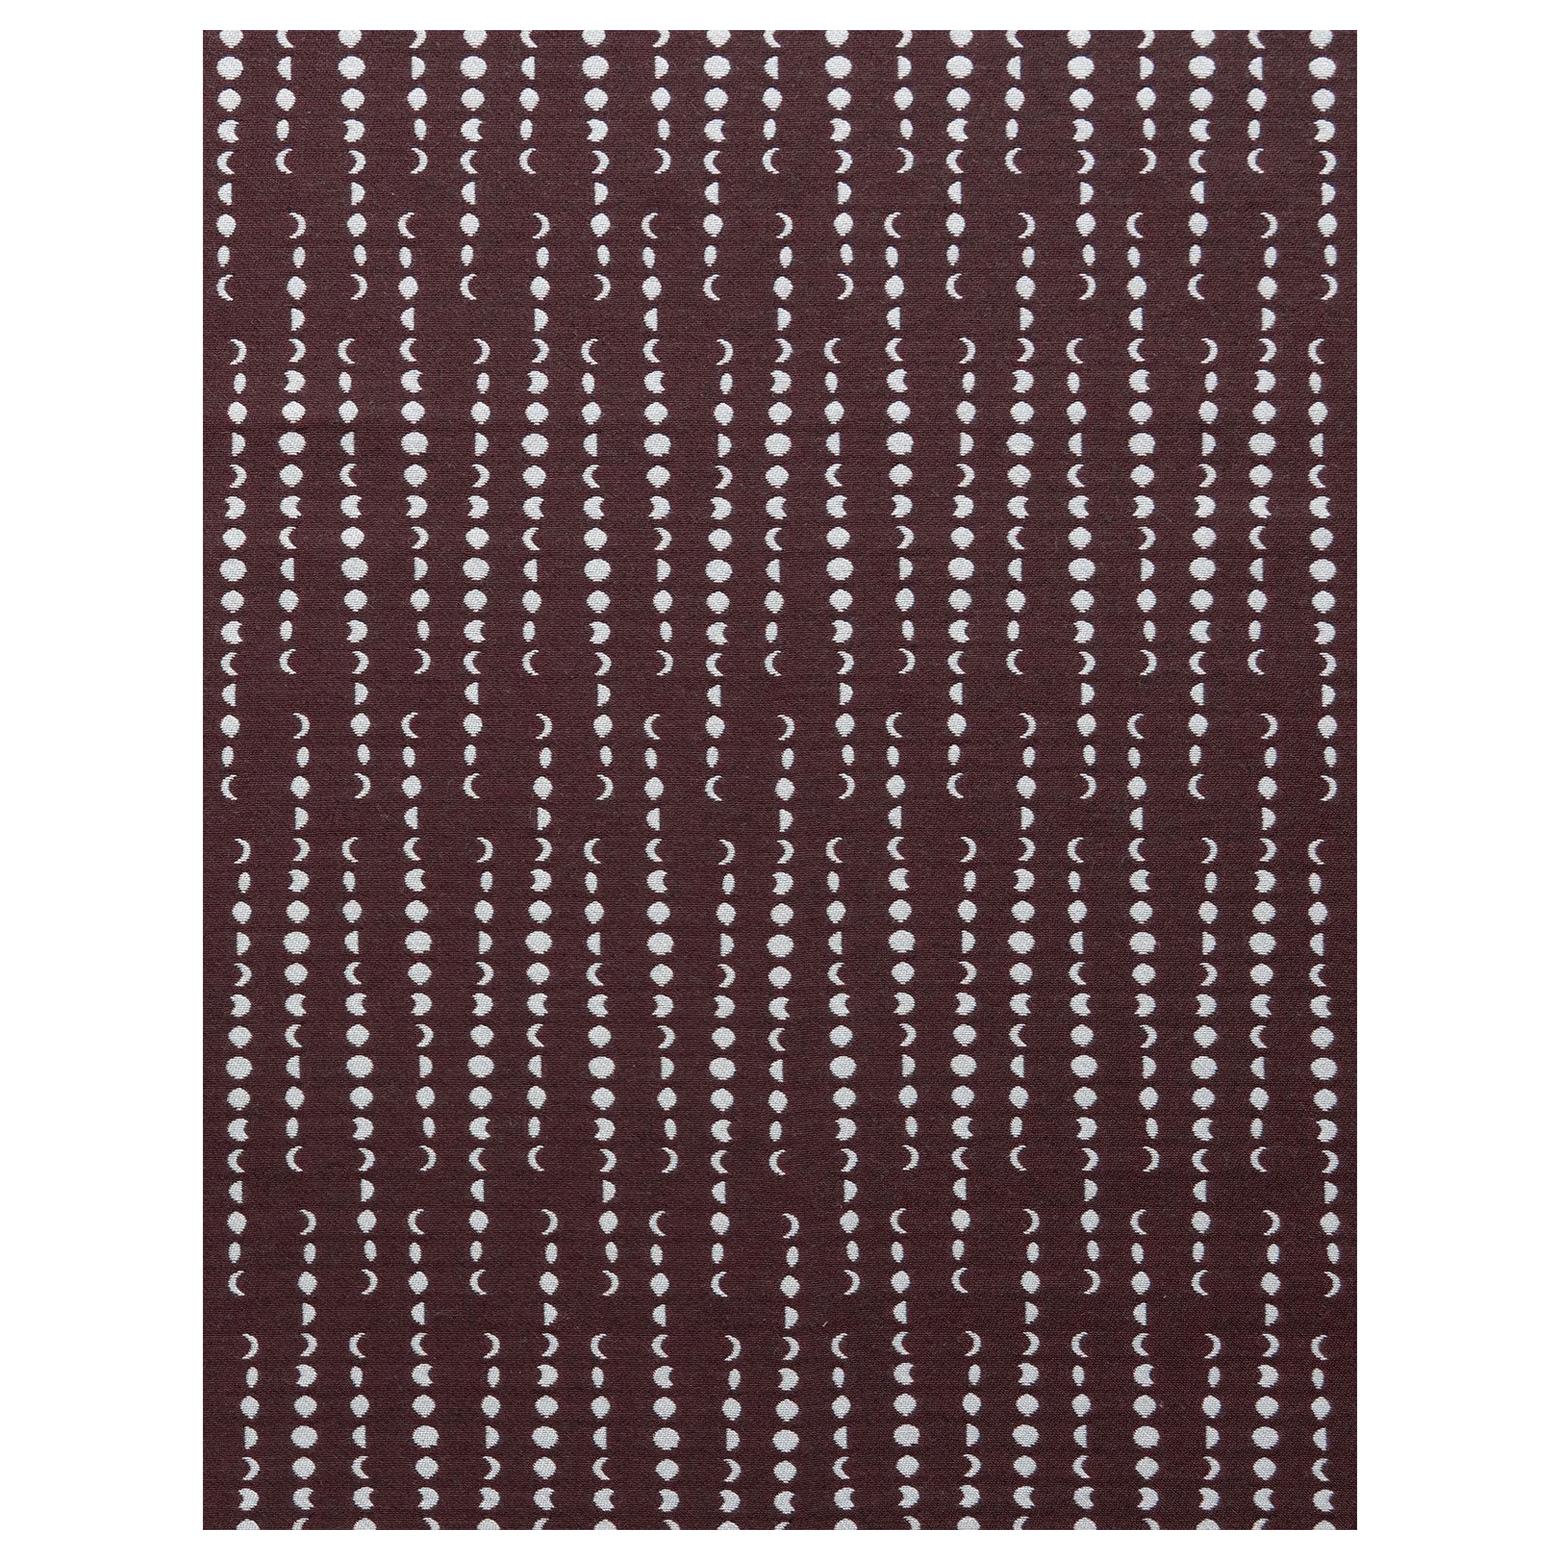 Earthlight Moon Woven Commercial Grade Fabric in Astra, Gray and Burgundy For Sale